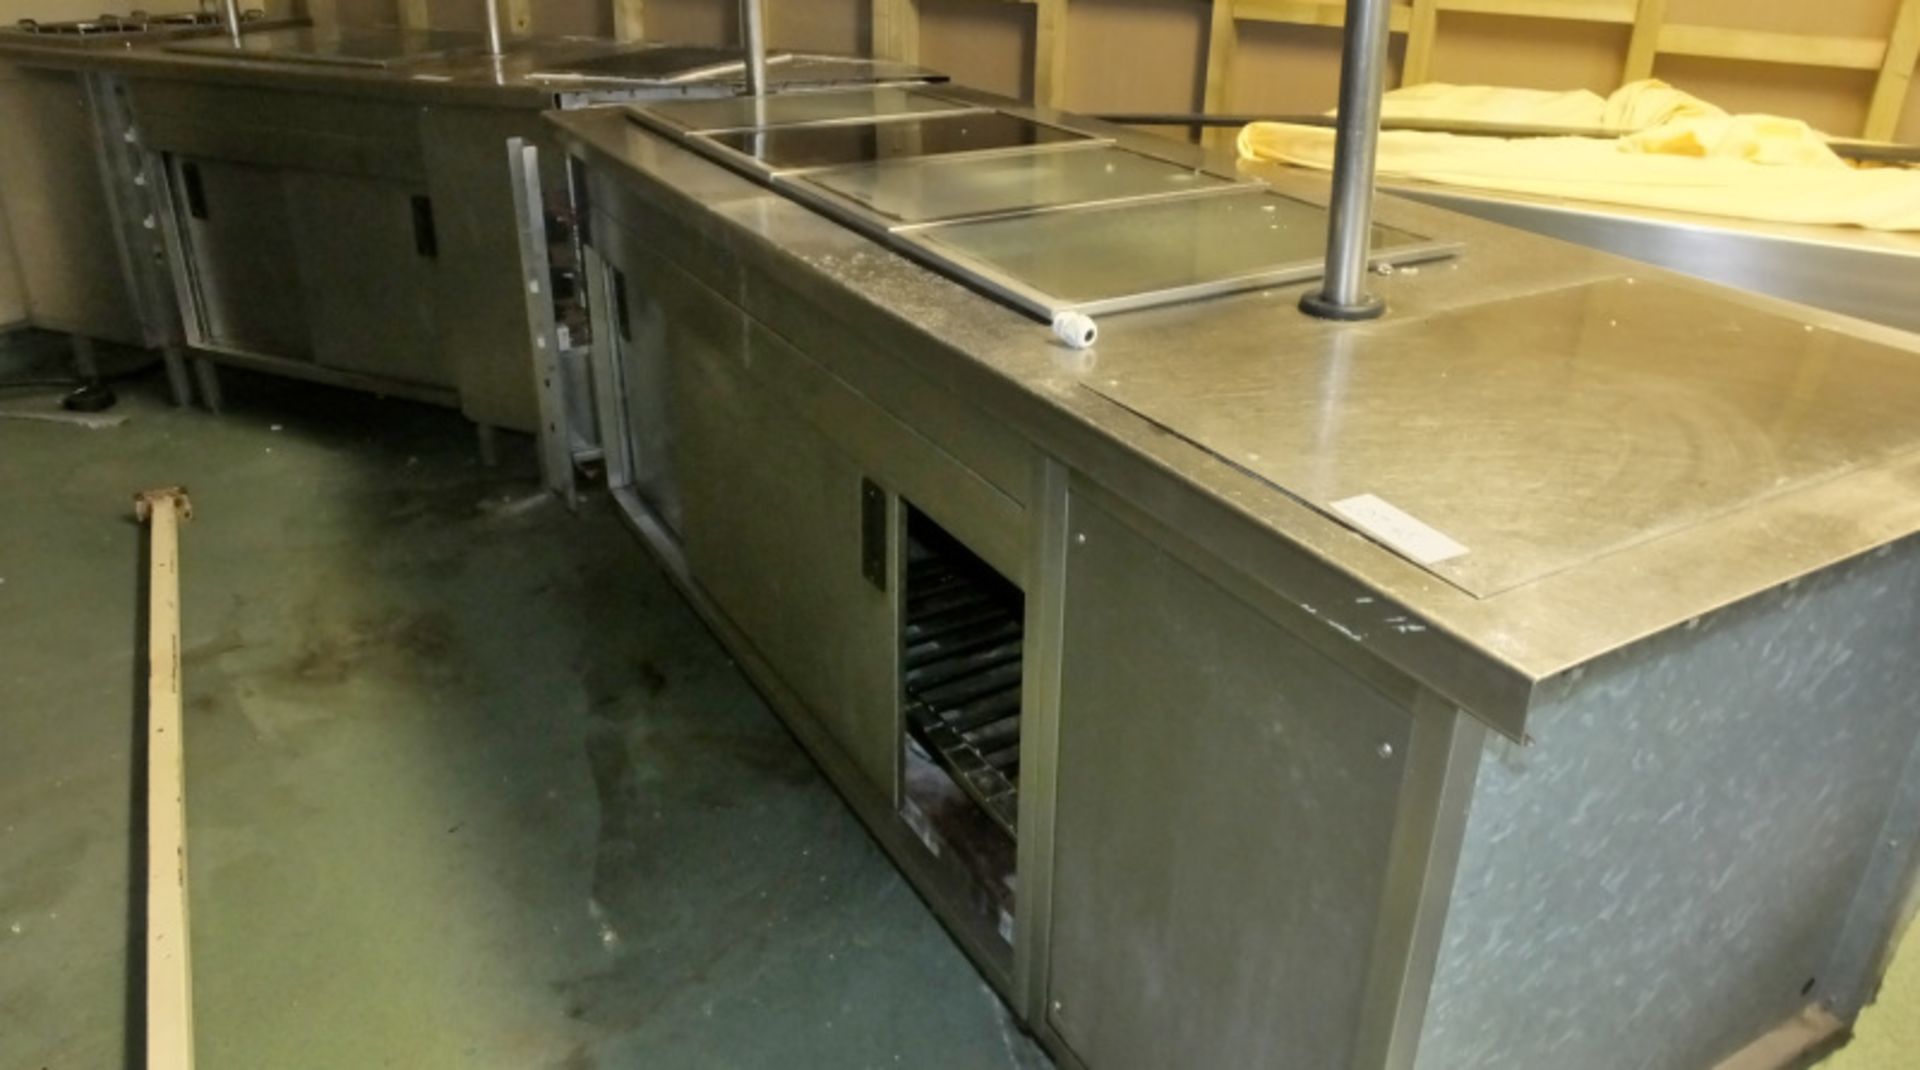 3x Moffat Stainless Steel Hot Plate Servery Units - Details & dimensions in the description - Image 8 of 14